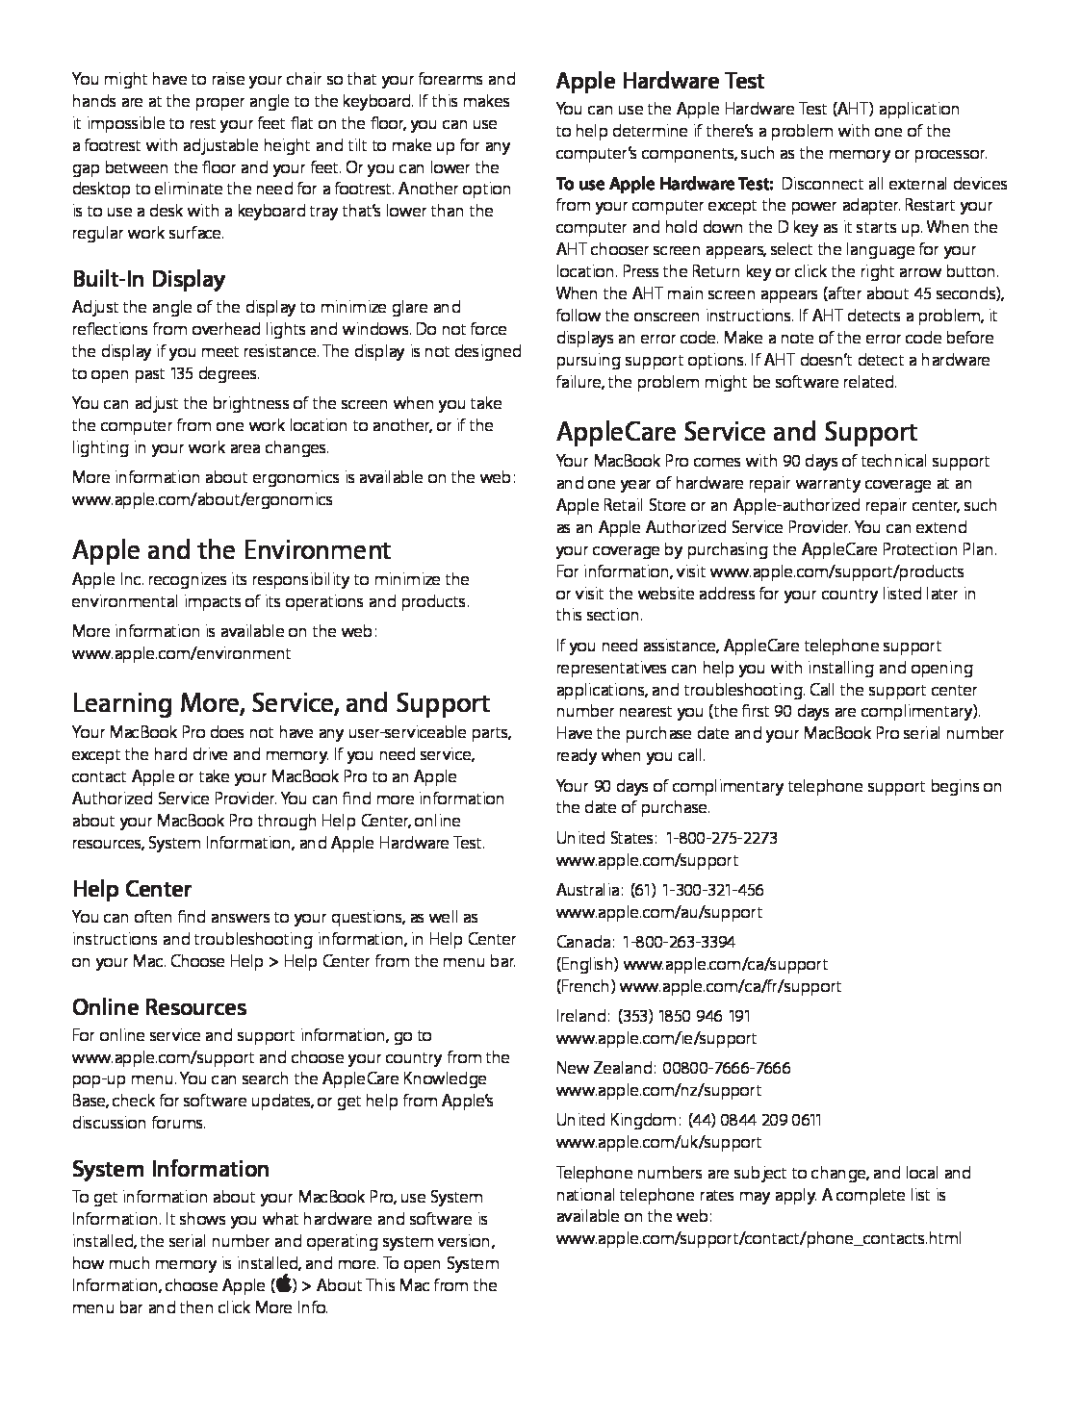 Apple MD101LL/A Apple and the Environment, Learning More, Service, and Support, AppleCare Service and Support, Help Center 